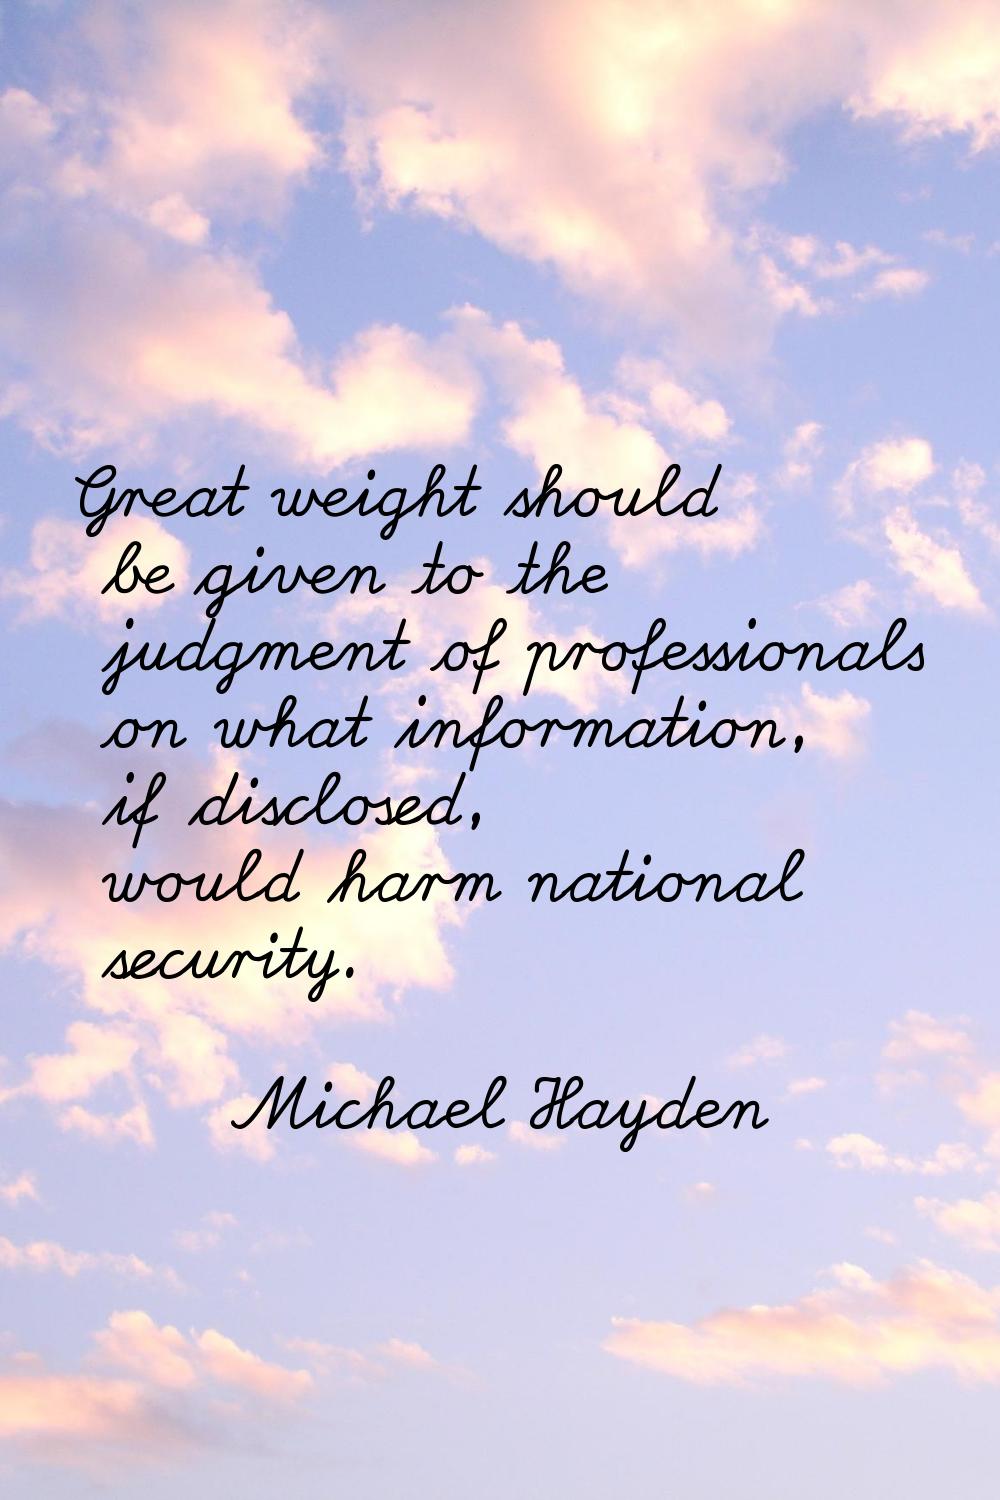 Great weight should be given to the judgment of professionals on what information, if disclosed, wo